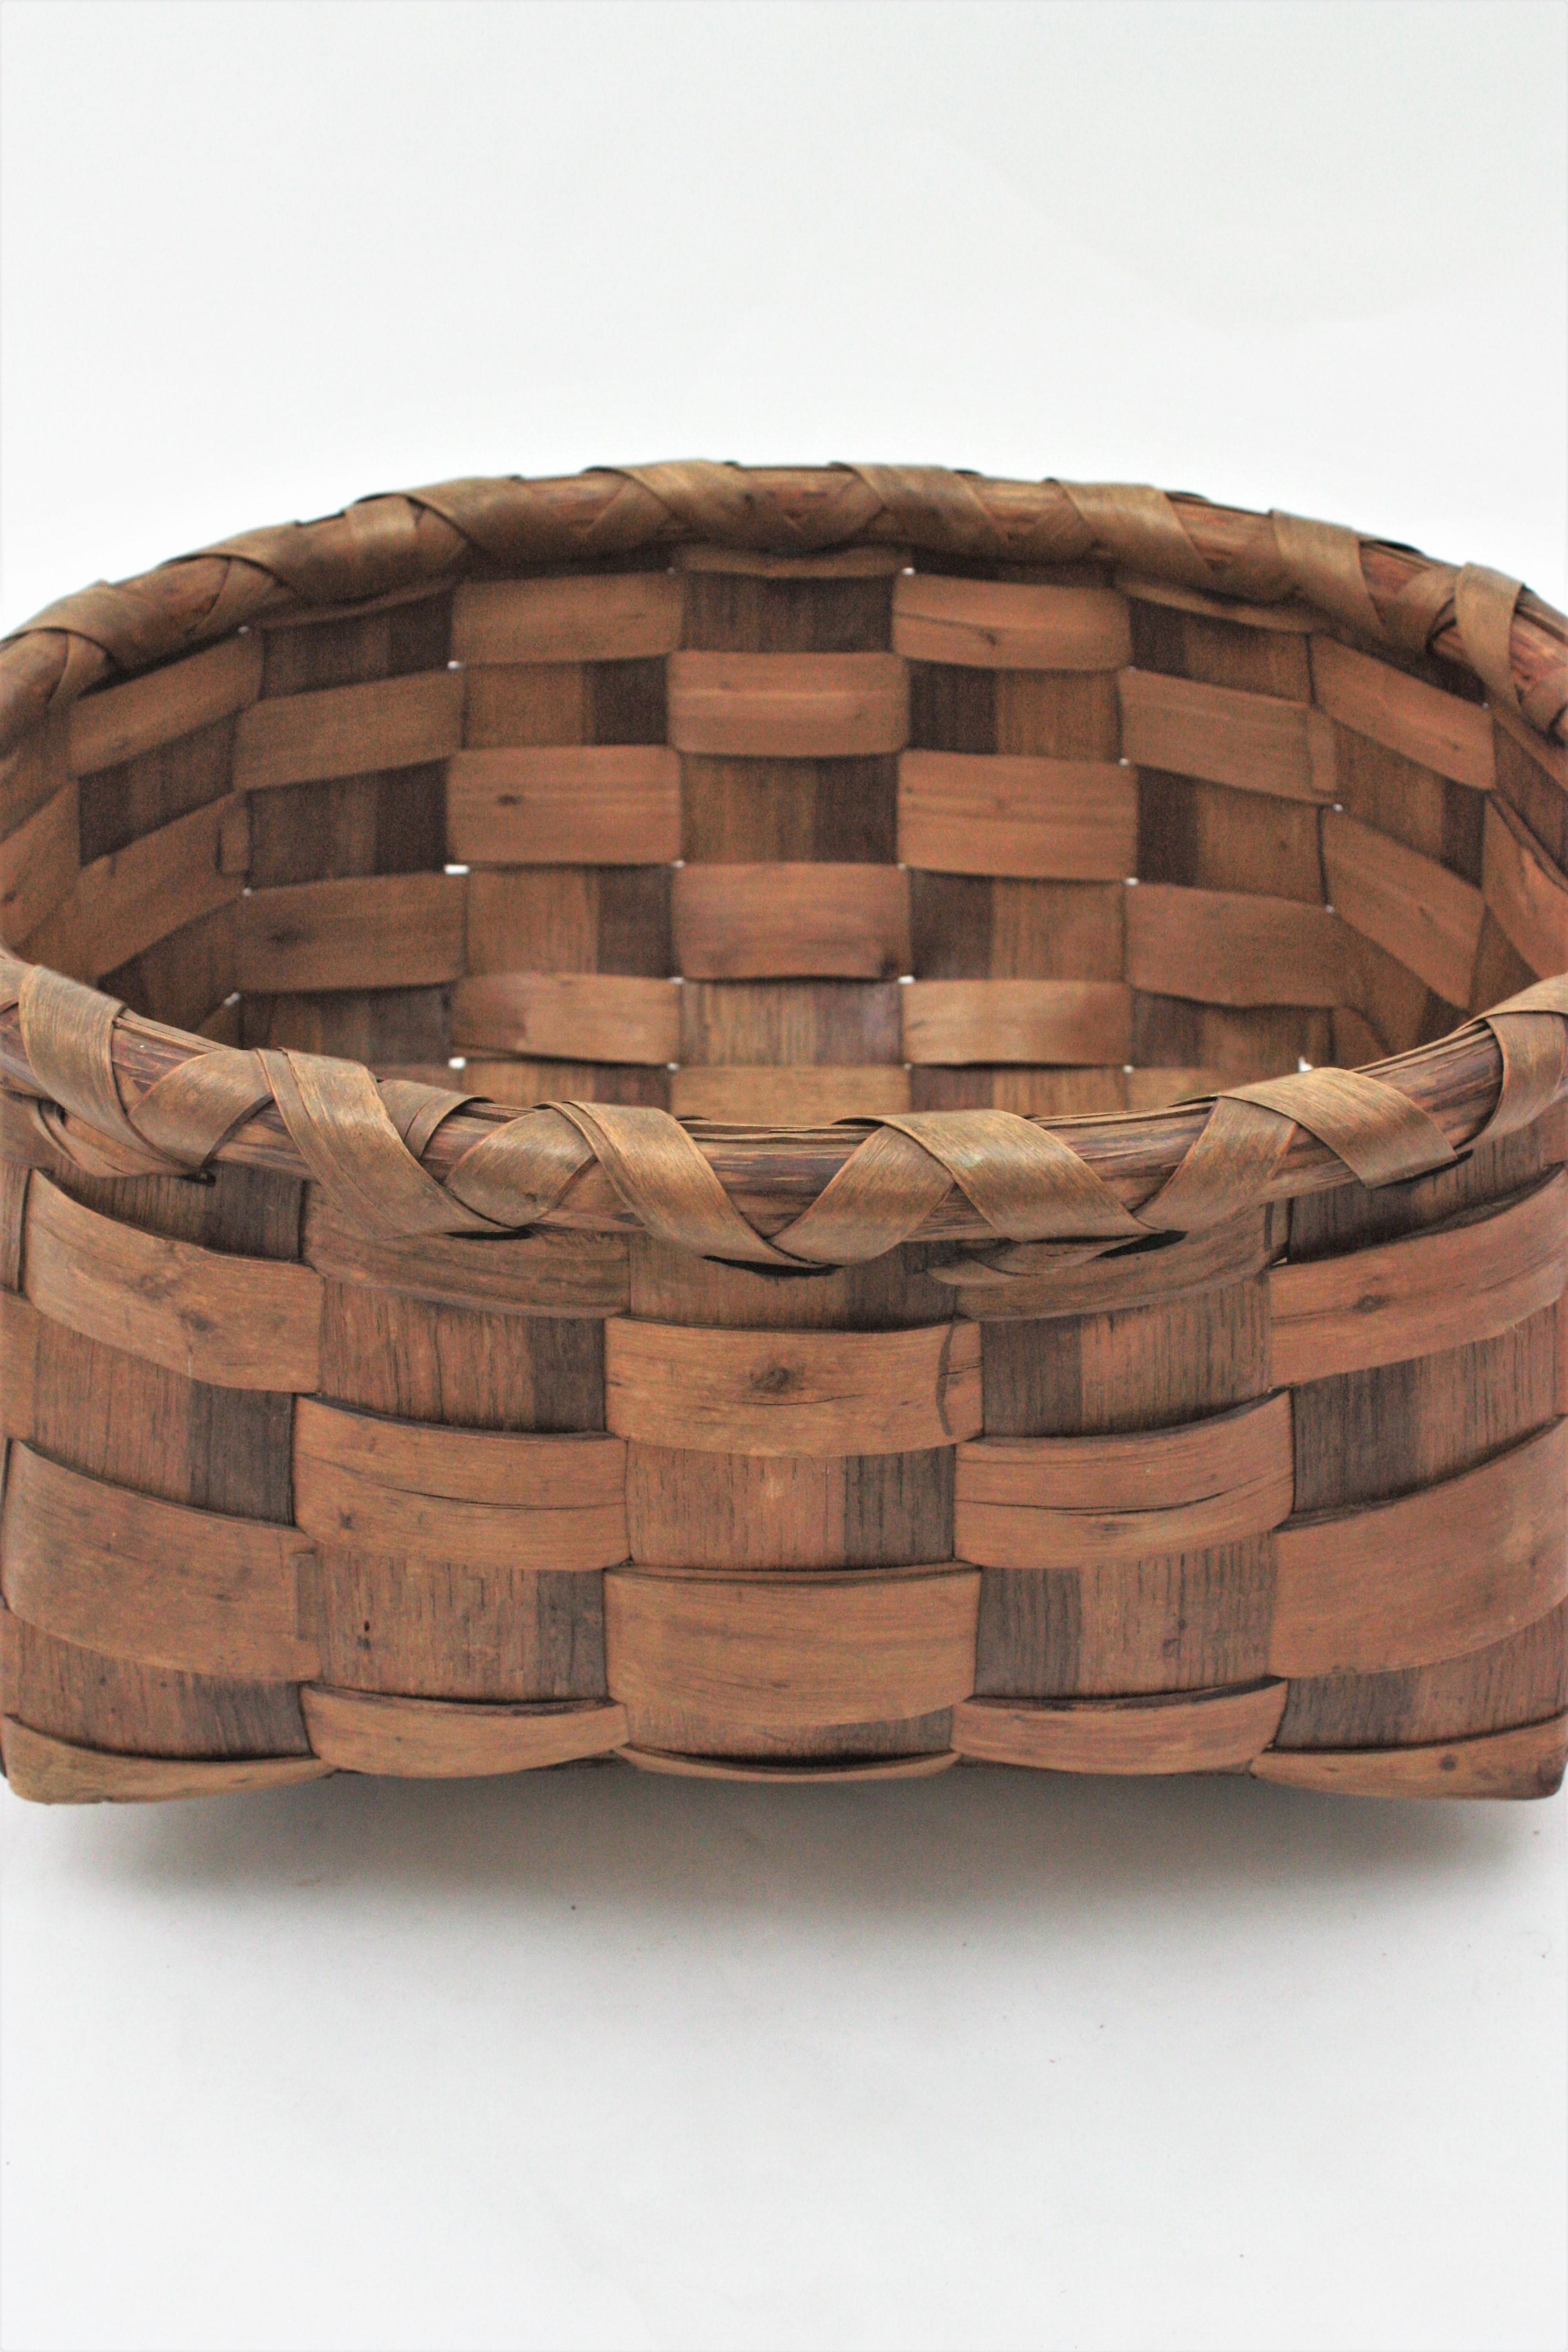 Spanish Braided Wood Large Rustic Basket, 1940s For Sale 7